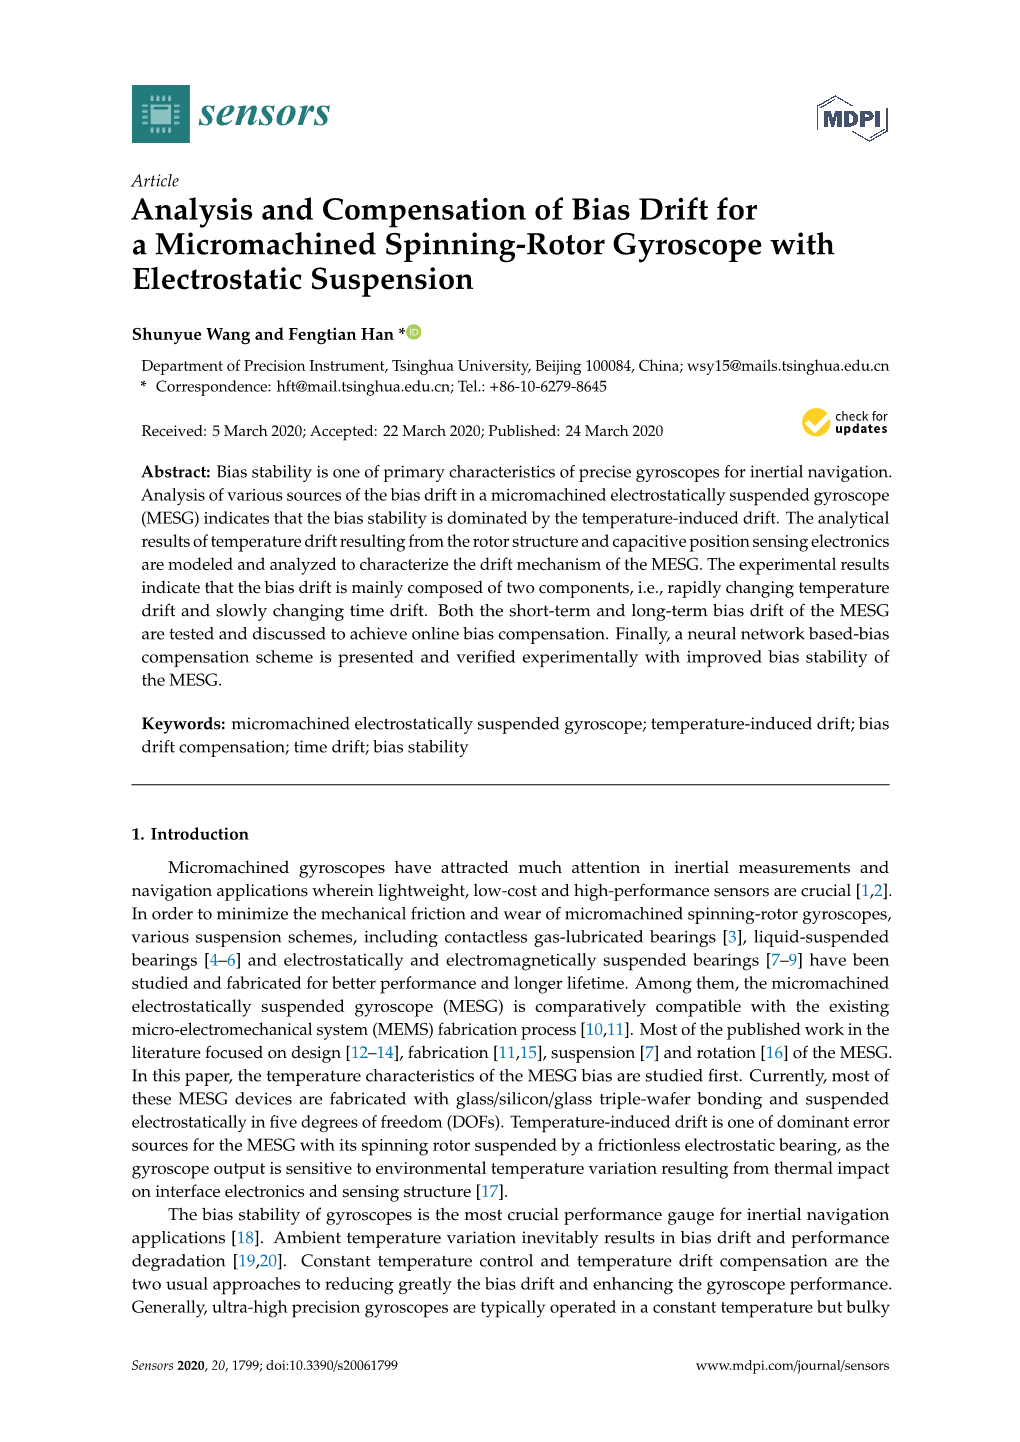 Analysis and Compensation of Bias Drift for a Micromachined Spinning-Rotor Gyroscope with Electrostatic Suspension